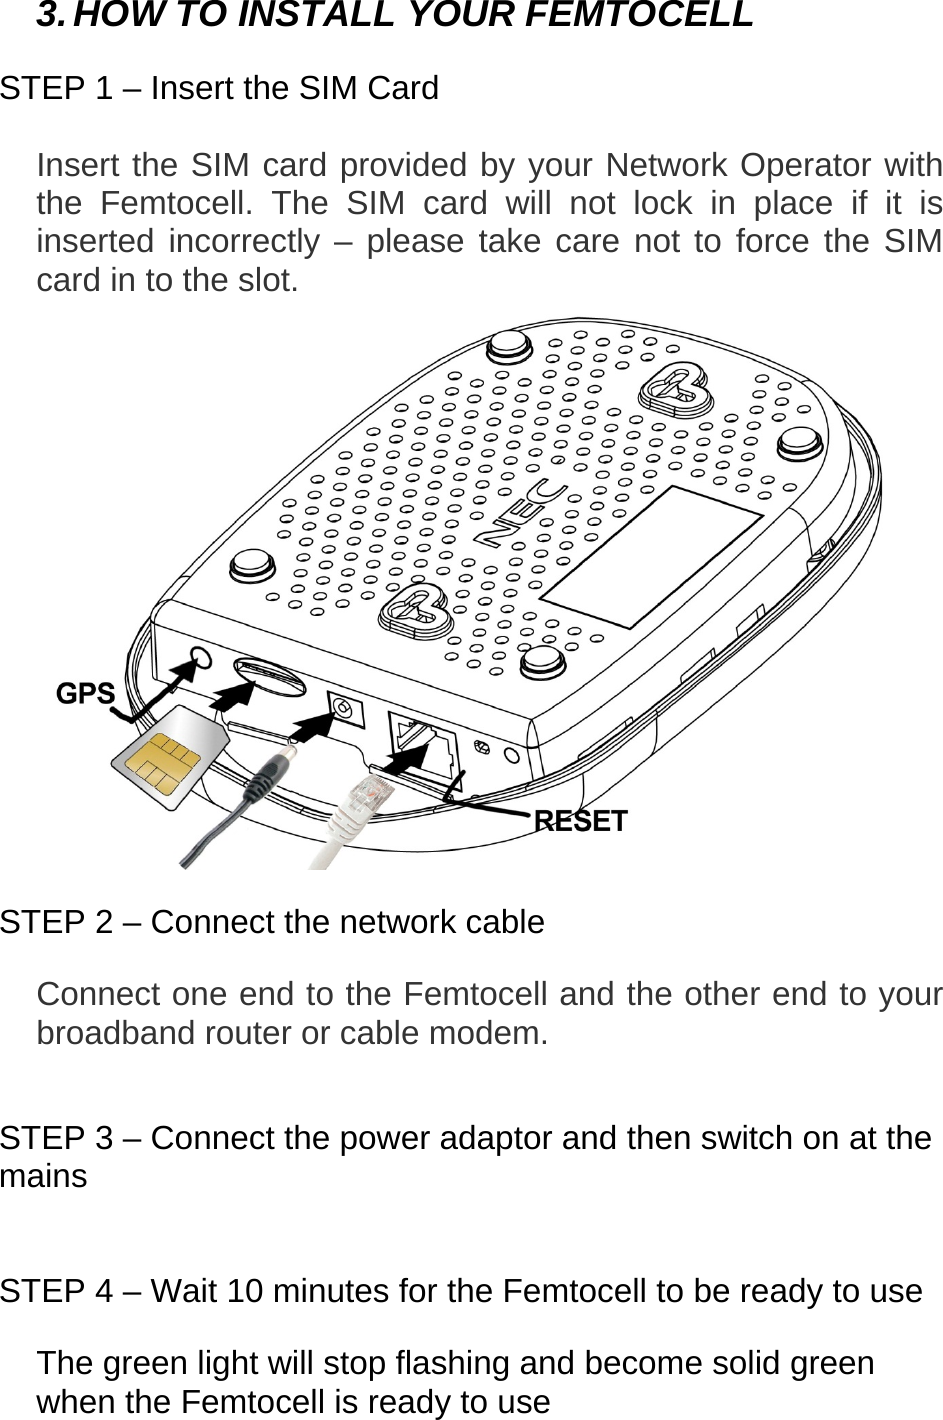   3. HOW TO INSTALL YOUR FEMTOCELL  STEP 1 – Insert the SIM Card  Insert the SIM card provided by your Network Operator with the Femtocell. The SIM card will not lock in place if it is inserted incorrectly – please take care not to force the SIM card in to the slot.   STEP 2 – Connect the network cable  Connect one end to the Femtocell and the other end to your broadband router or cable modem.   STEP 3 – Connect the power adaptor and then switch on at the mains   STEP 4 – Wait 10 minutes for the Femtocell to be ready to use  The green light will stop flashing and become solid green when the Femtocell is ready to use   